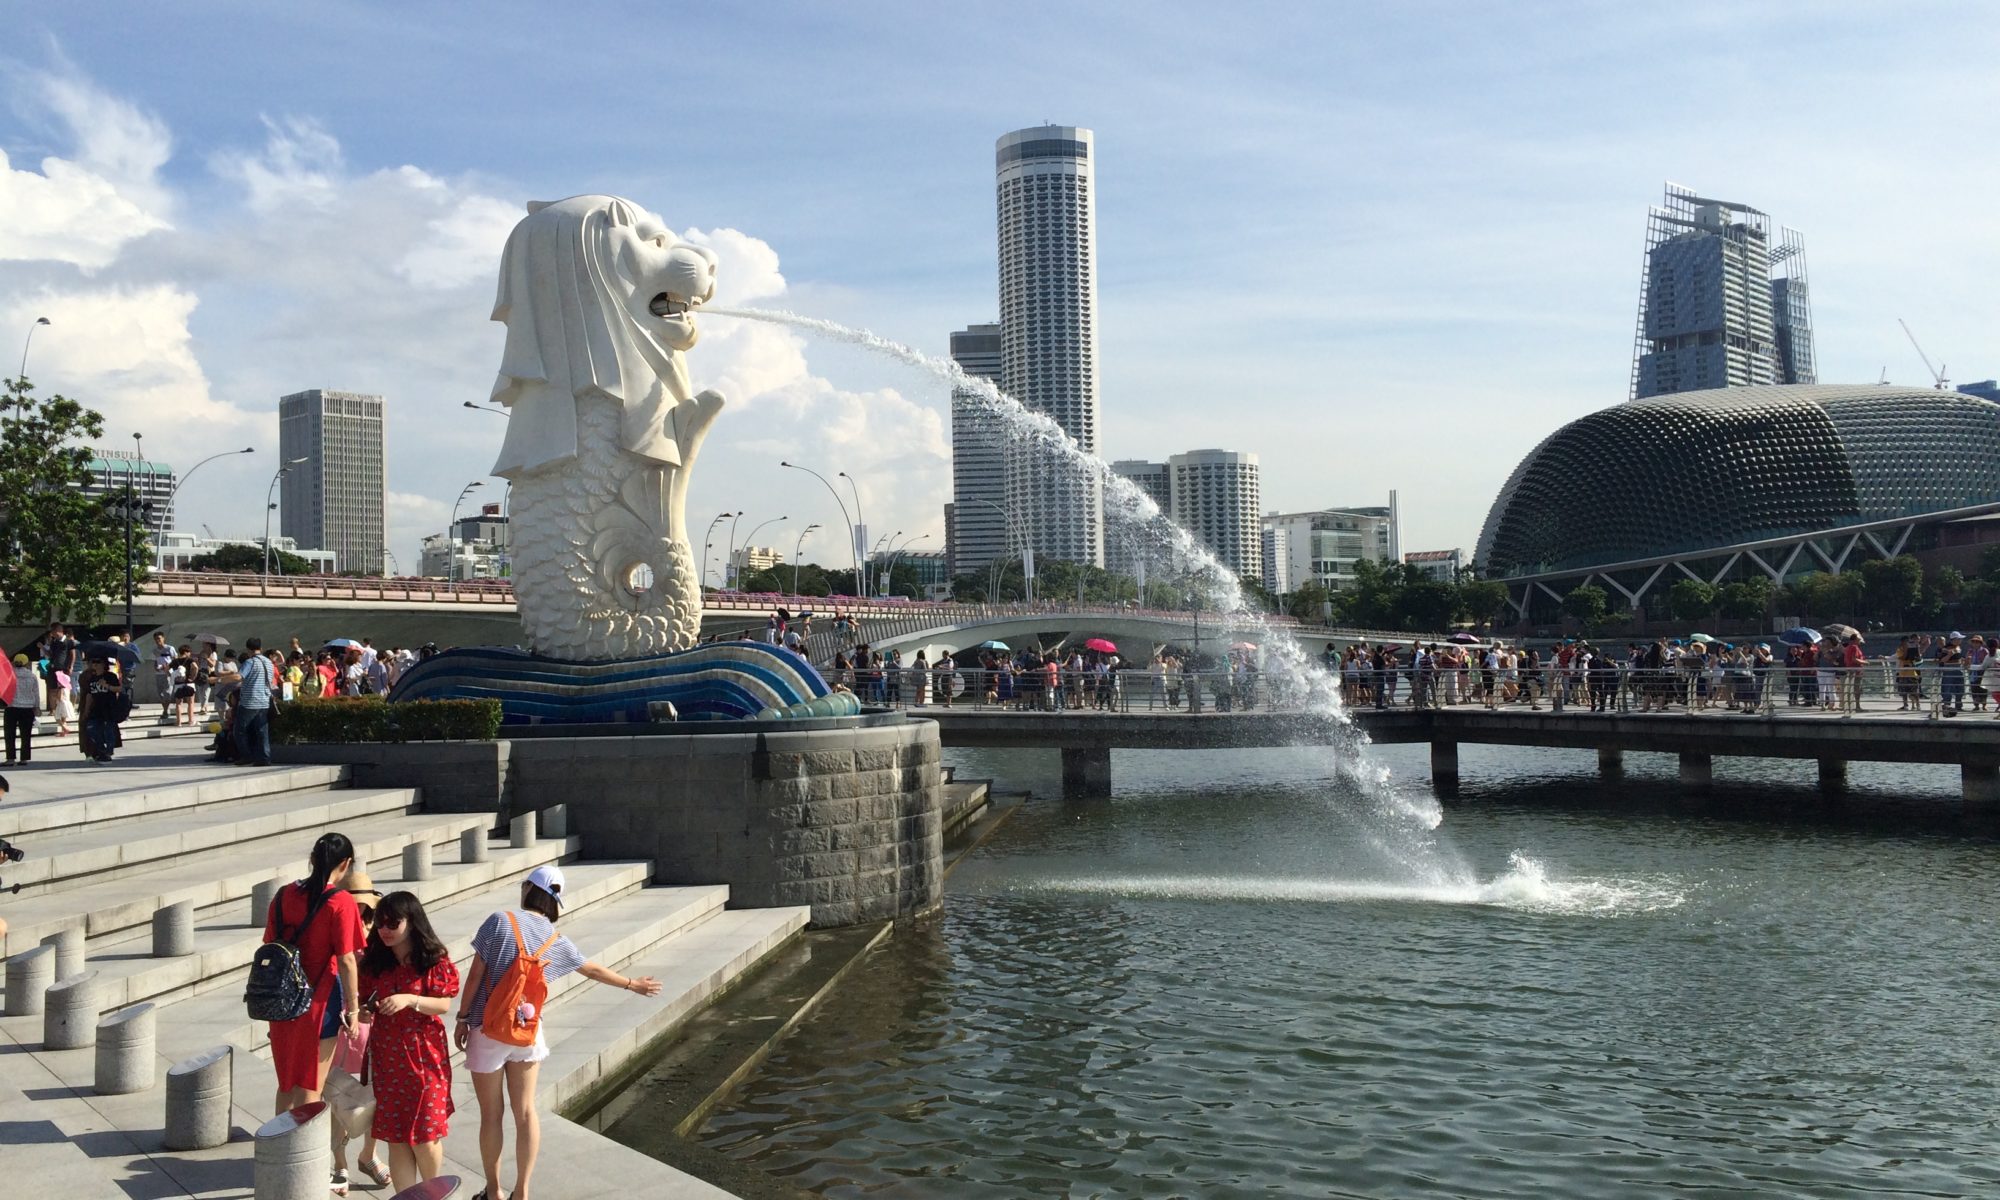 Photo of the Singapore Merlion statue spraying water into a pool with people watching and city skyline in the distance